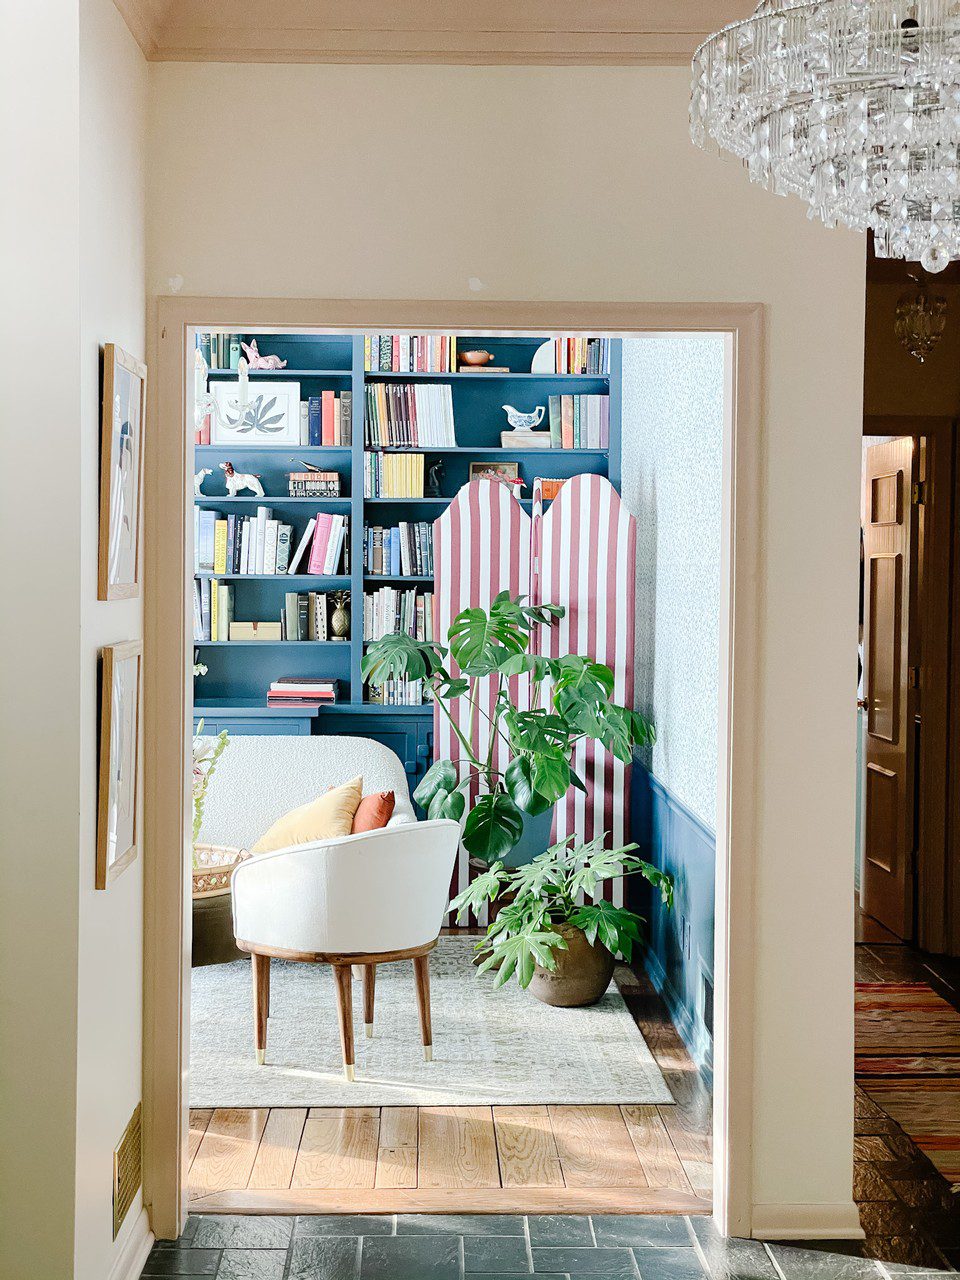 How to Do a High-Impact, Zero Dollar Room Refresh in 4 Easy Steps